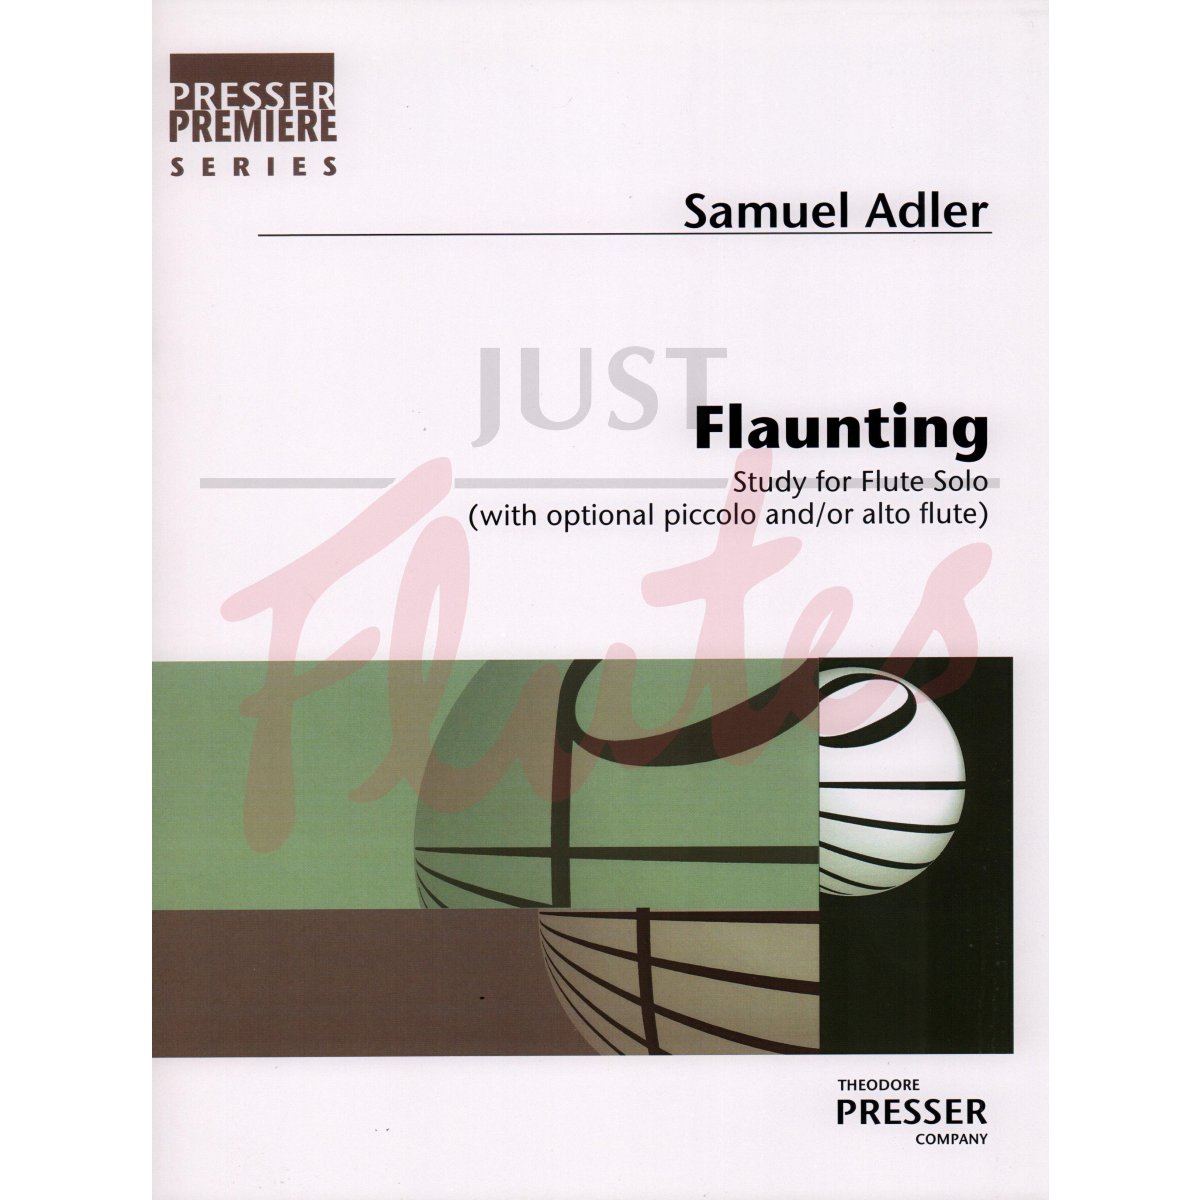 Flaunting: Study for Solo Flute